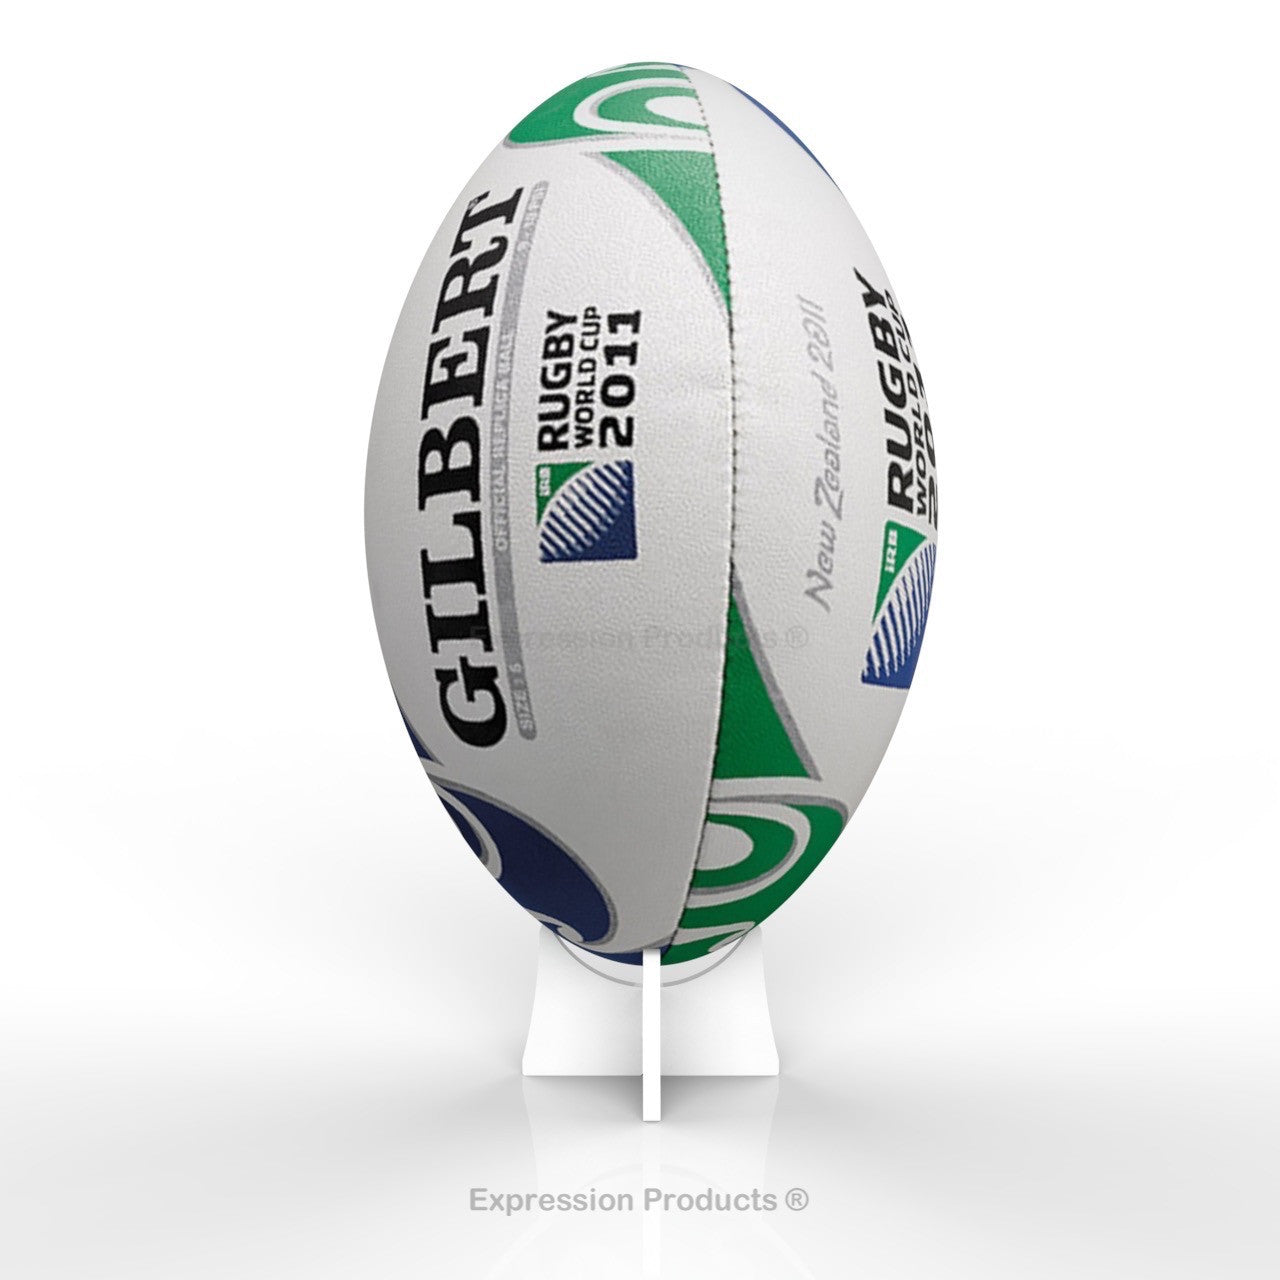 Rugby Ball Display Stand - Expression Products Ltd